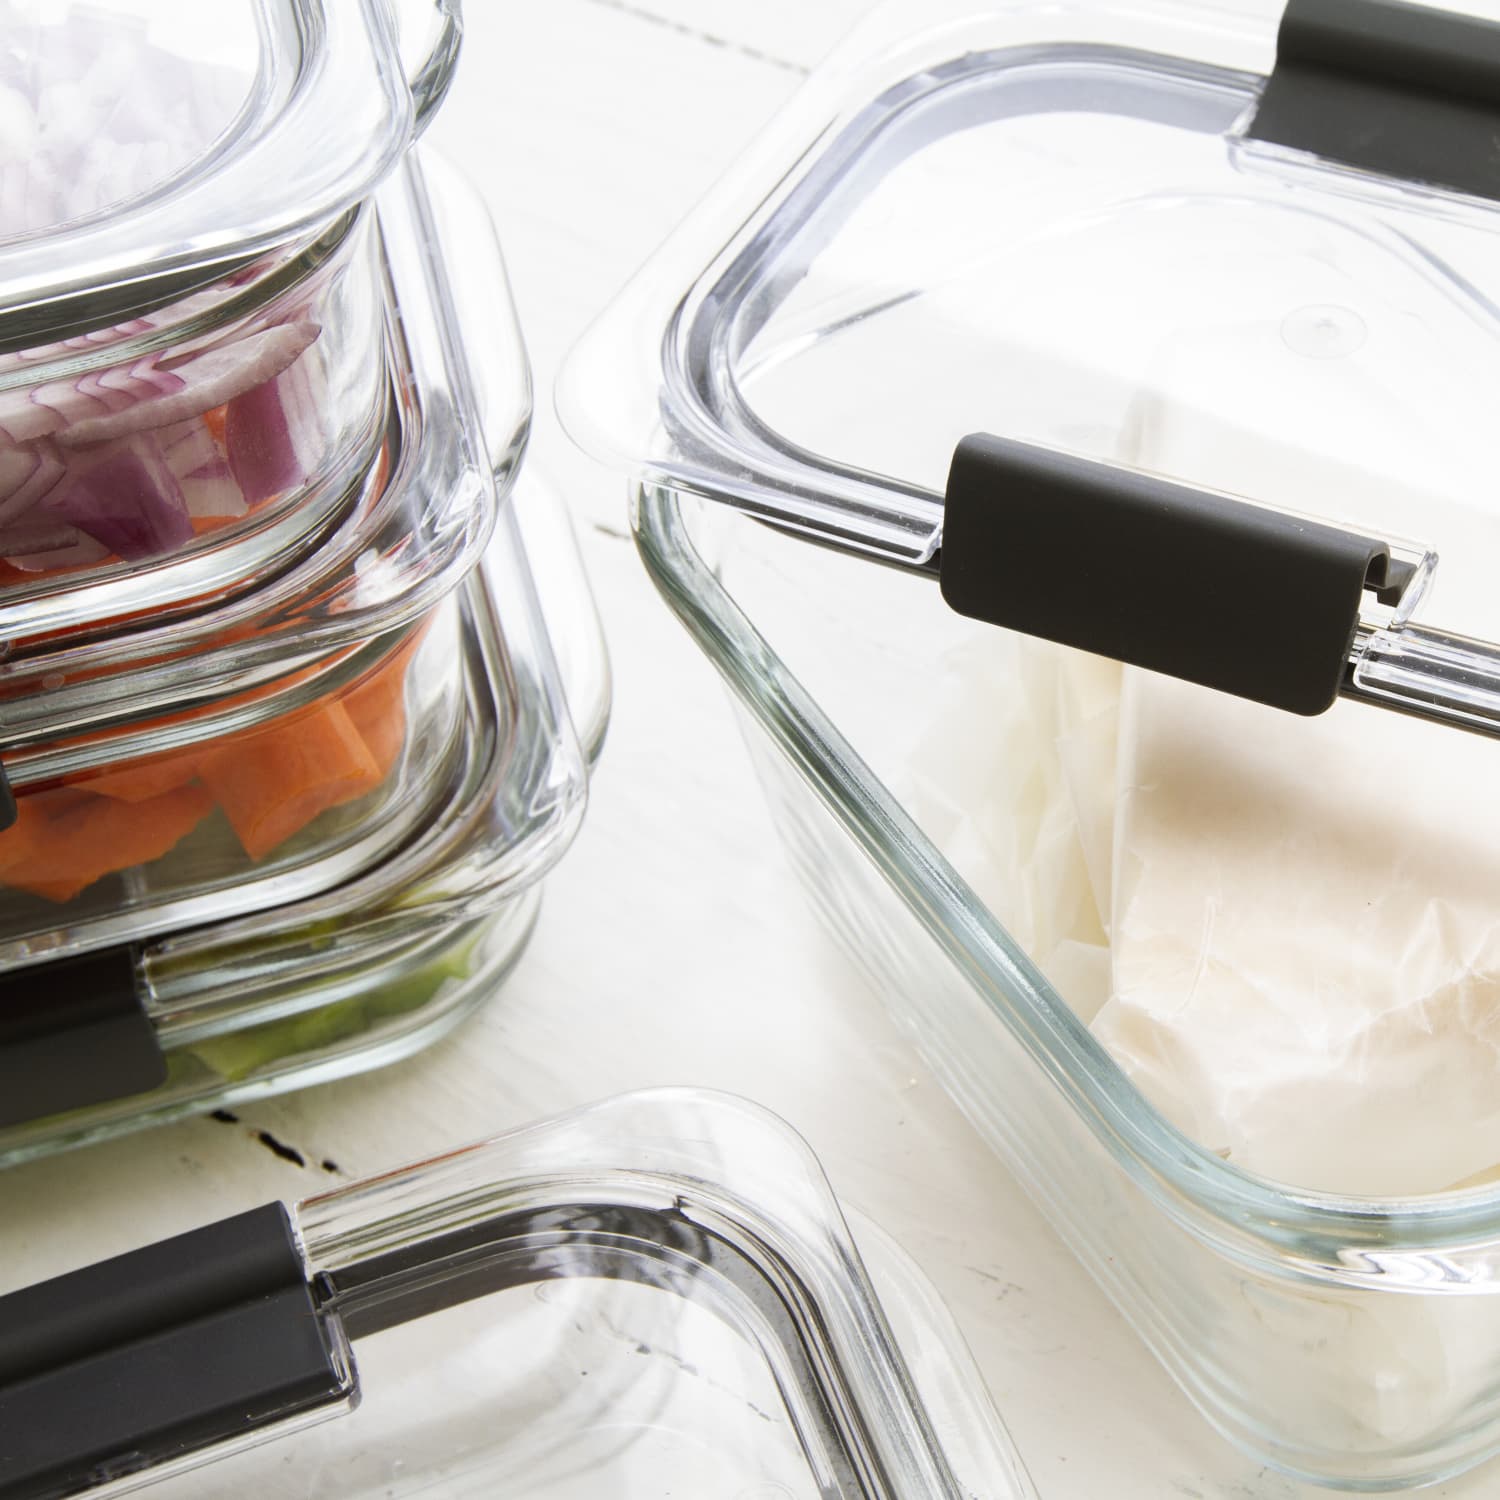 Rubbermaid Brilliance Glass Food Storage Containers Review